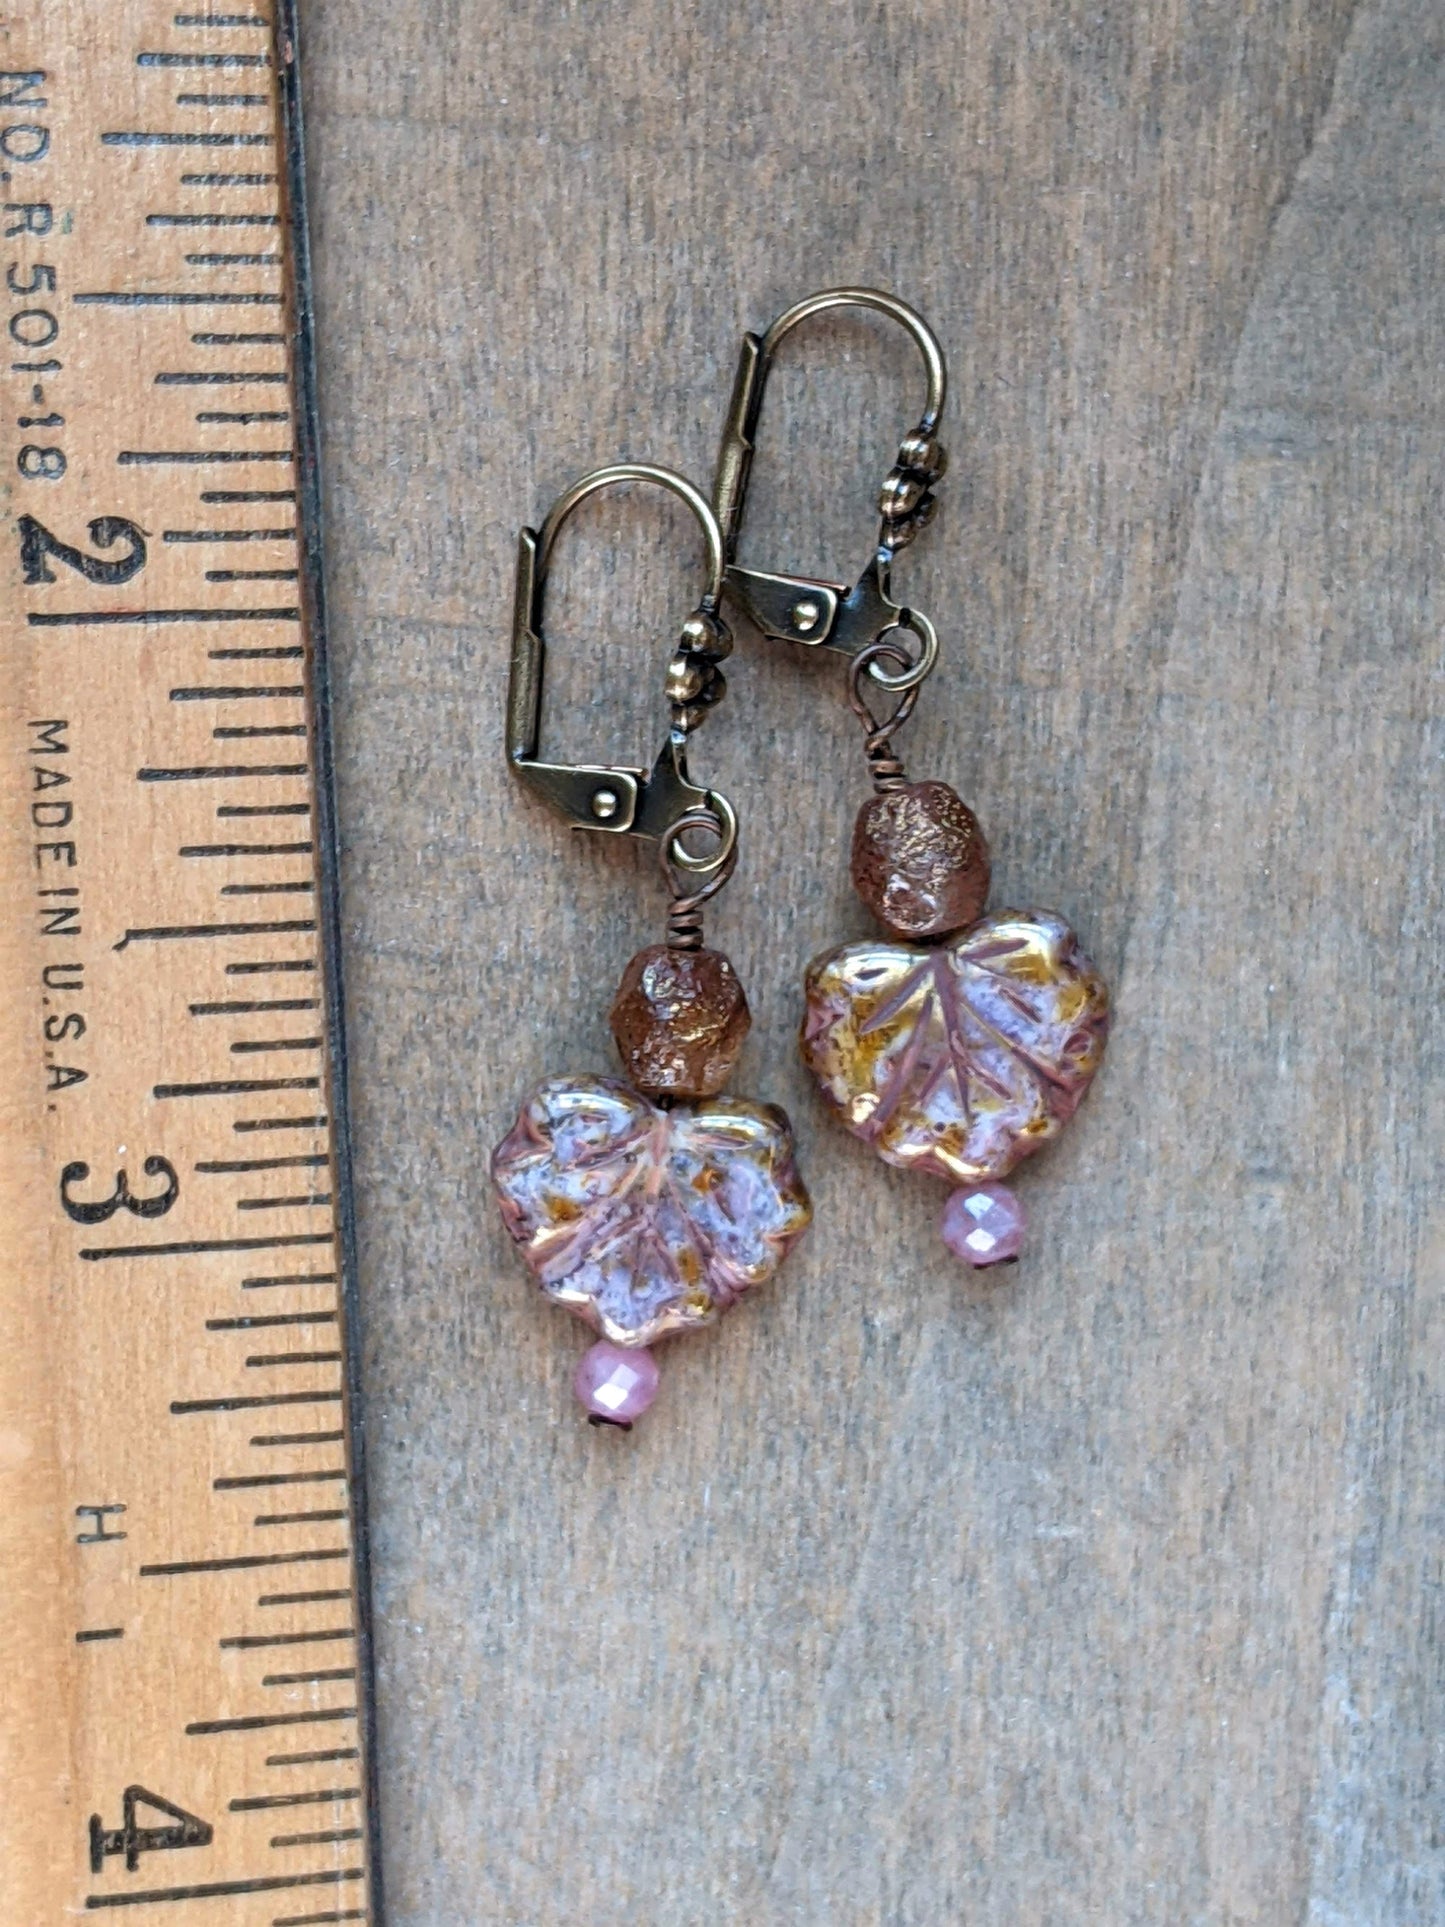 Leaf Earrings Pink and Gold